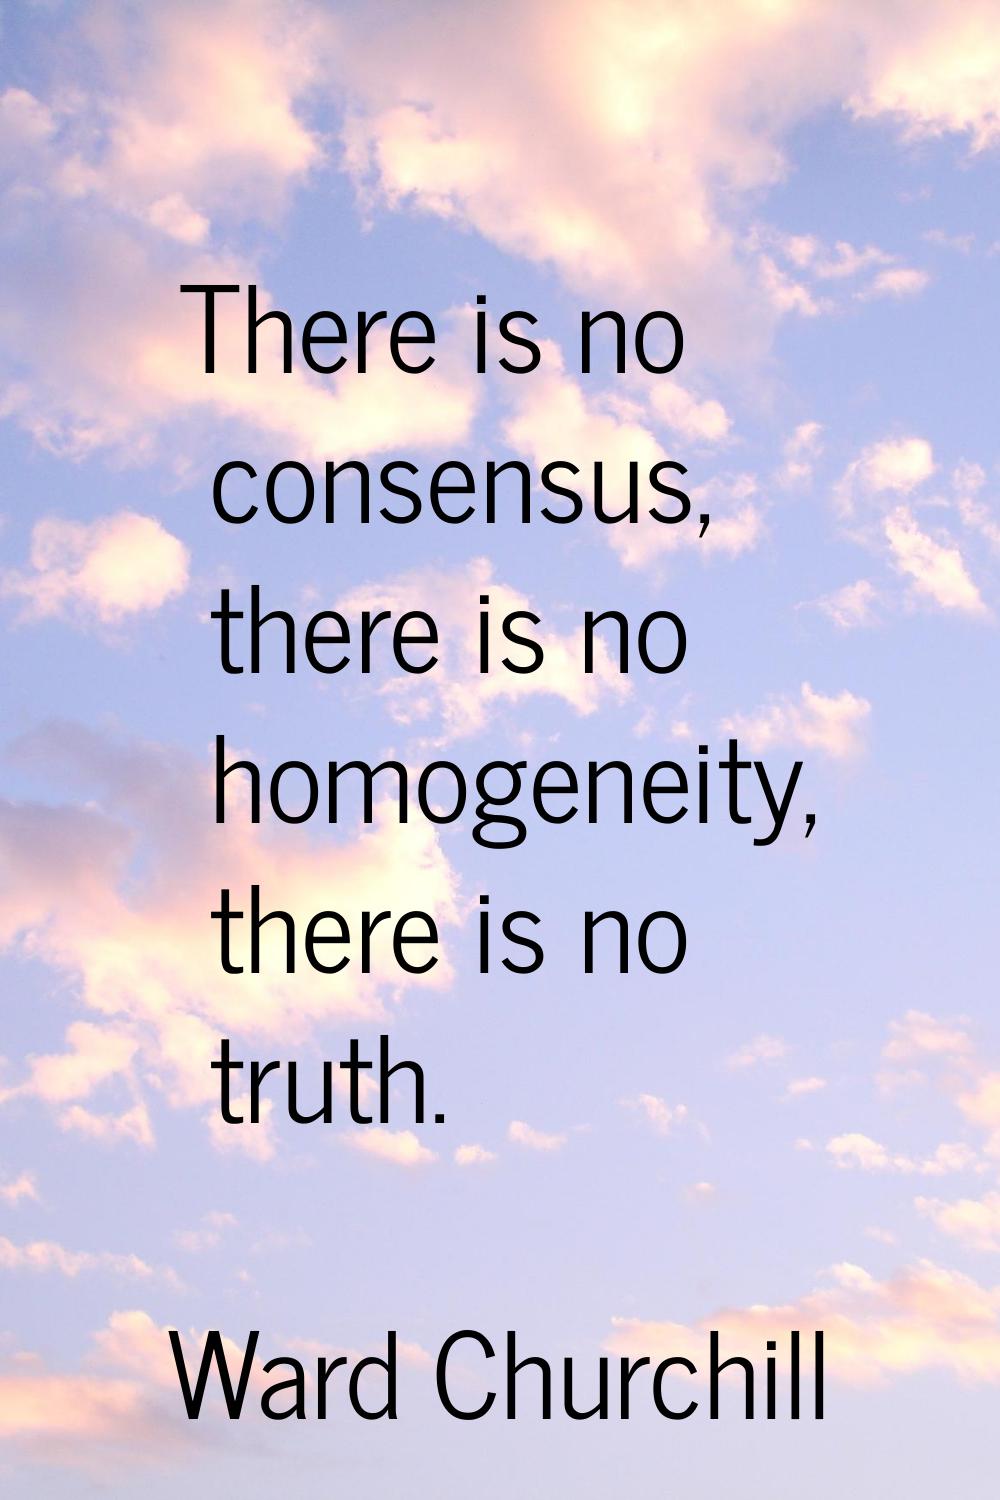 There is no consensus, there is no homogeneity, there is no truth.